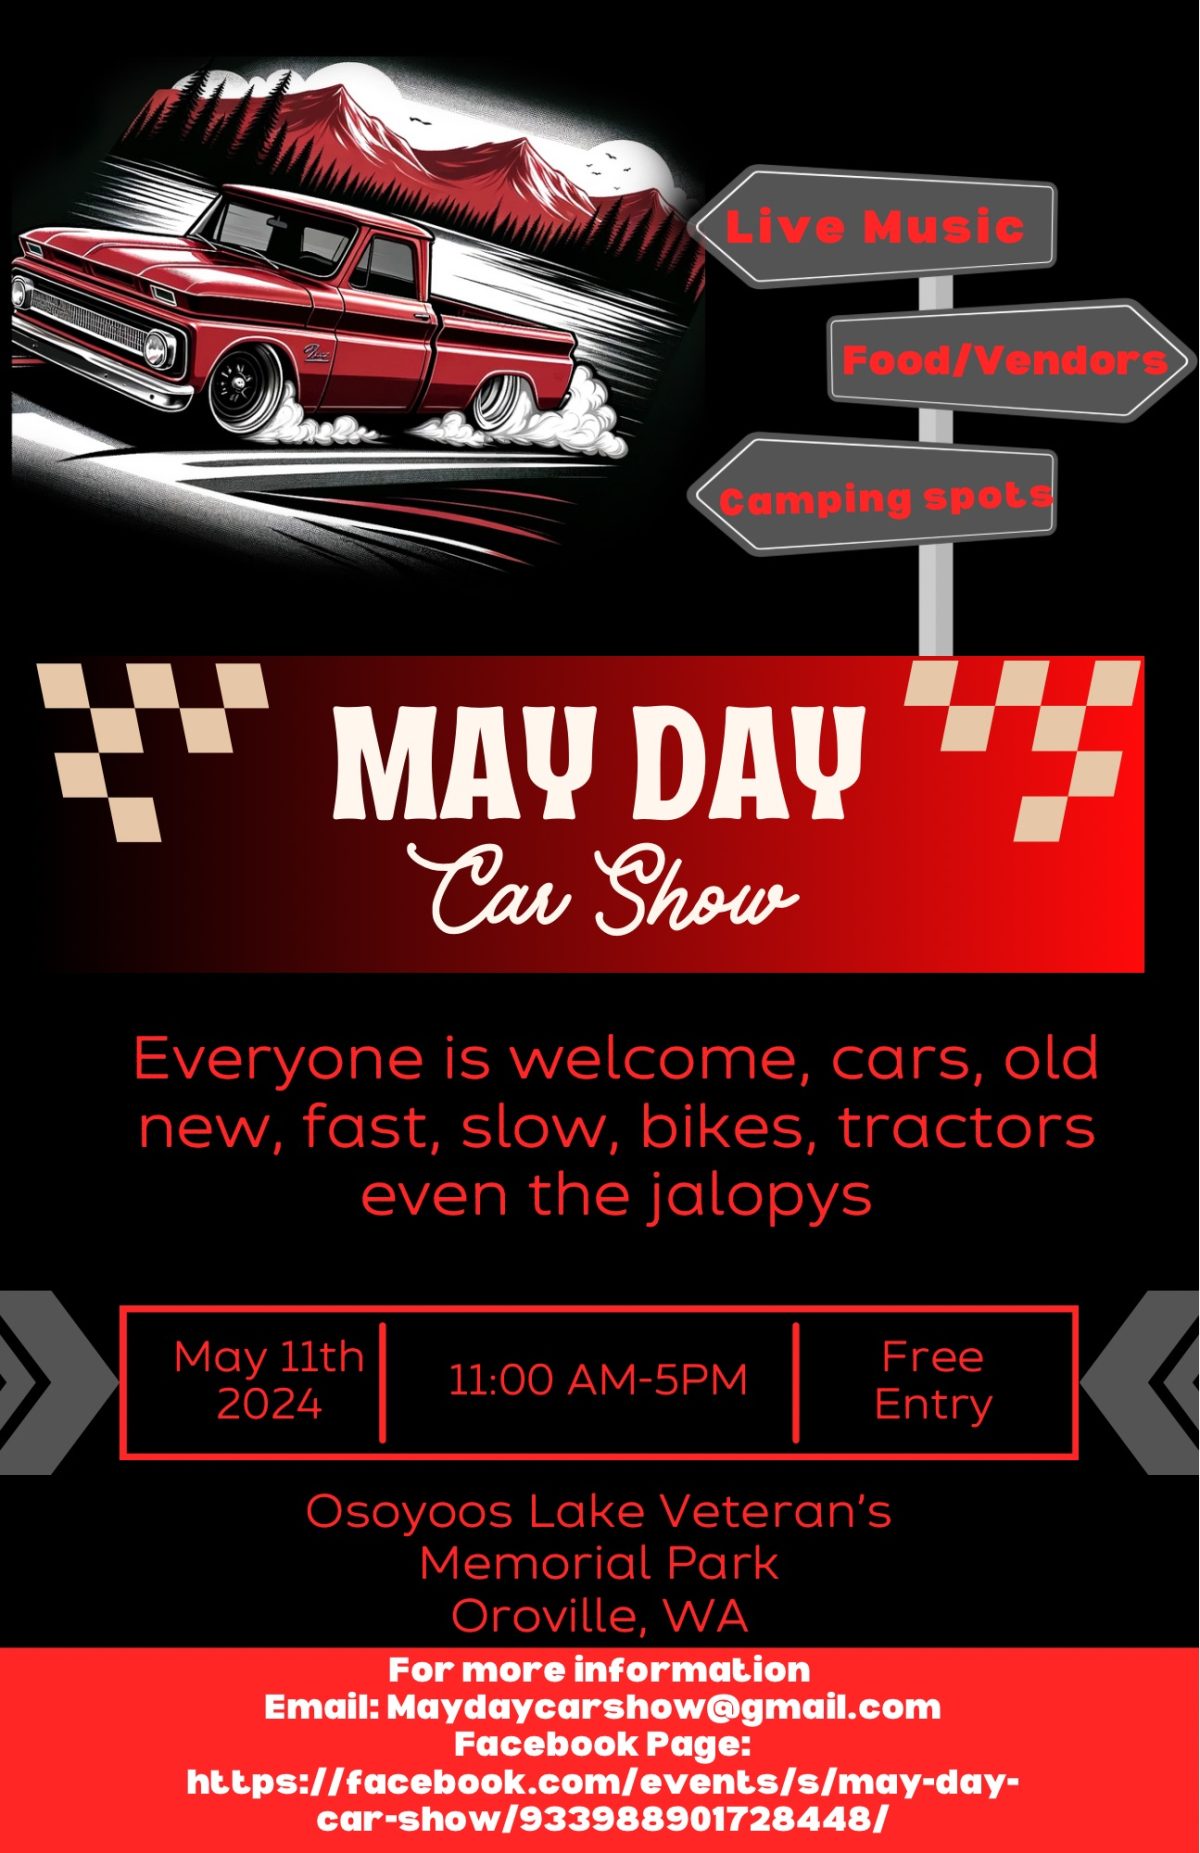 May Day Car Show